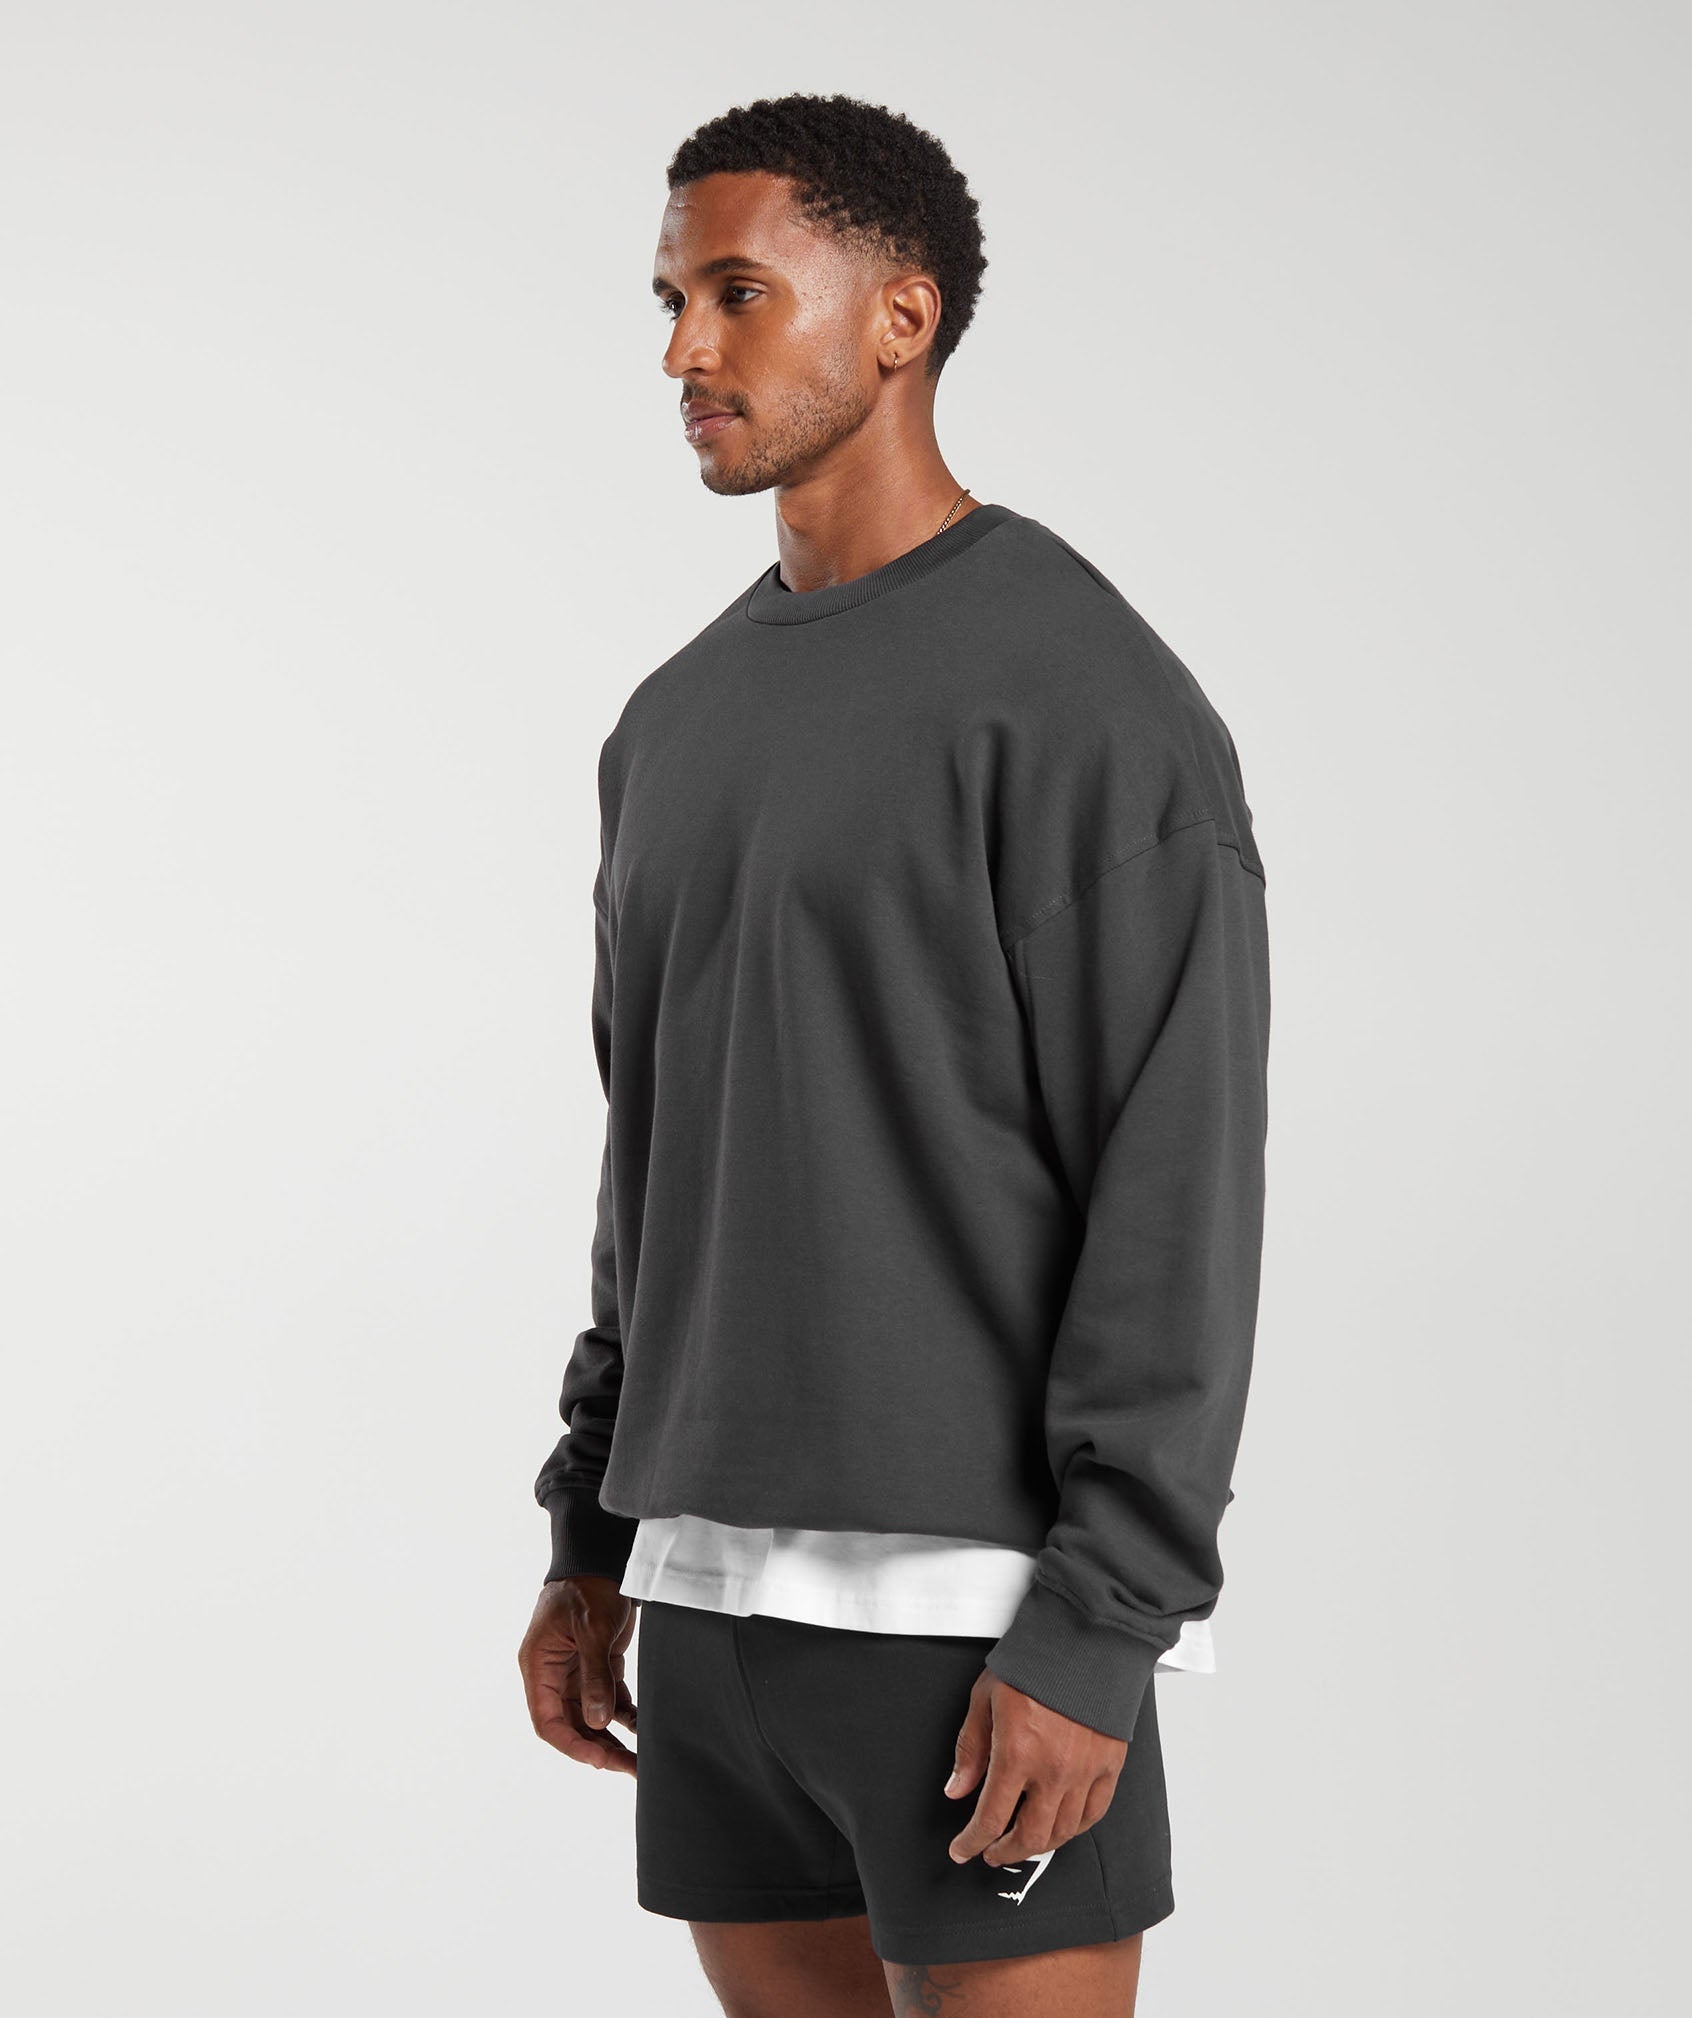 Rest Day Essential Crew in Onyx Grey - view 3